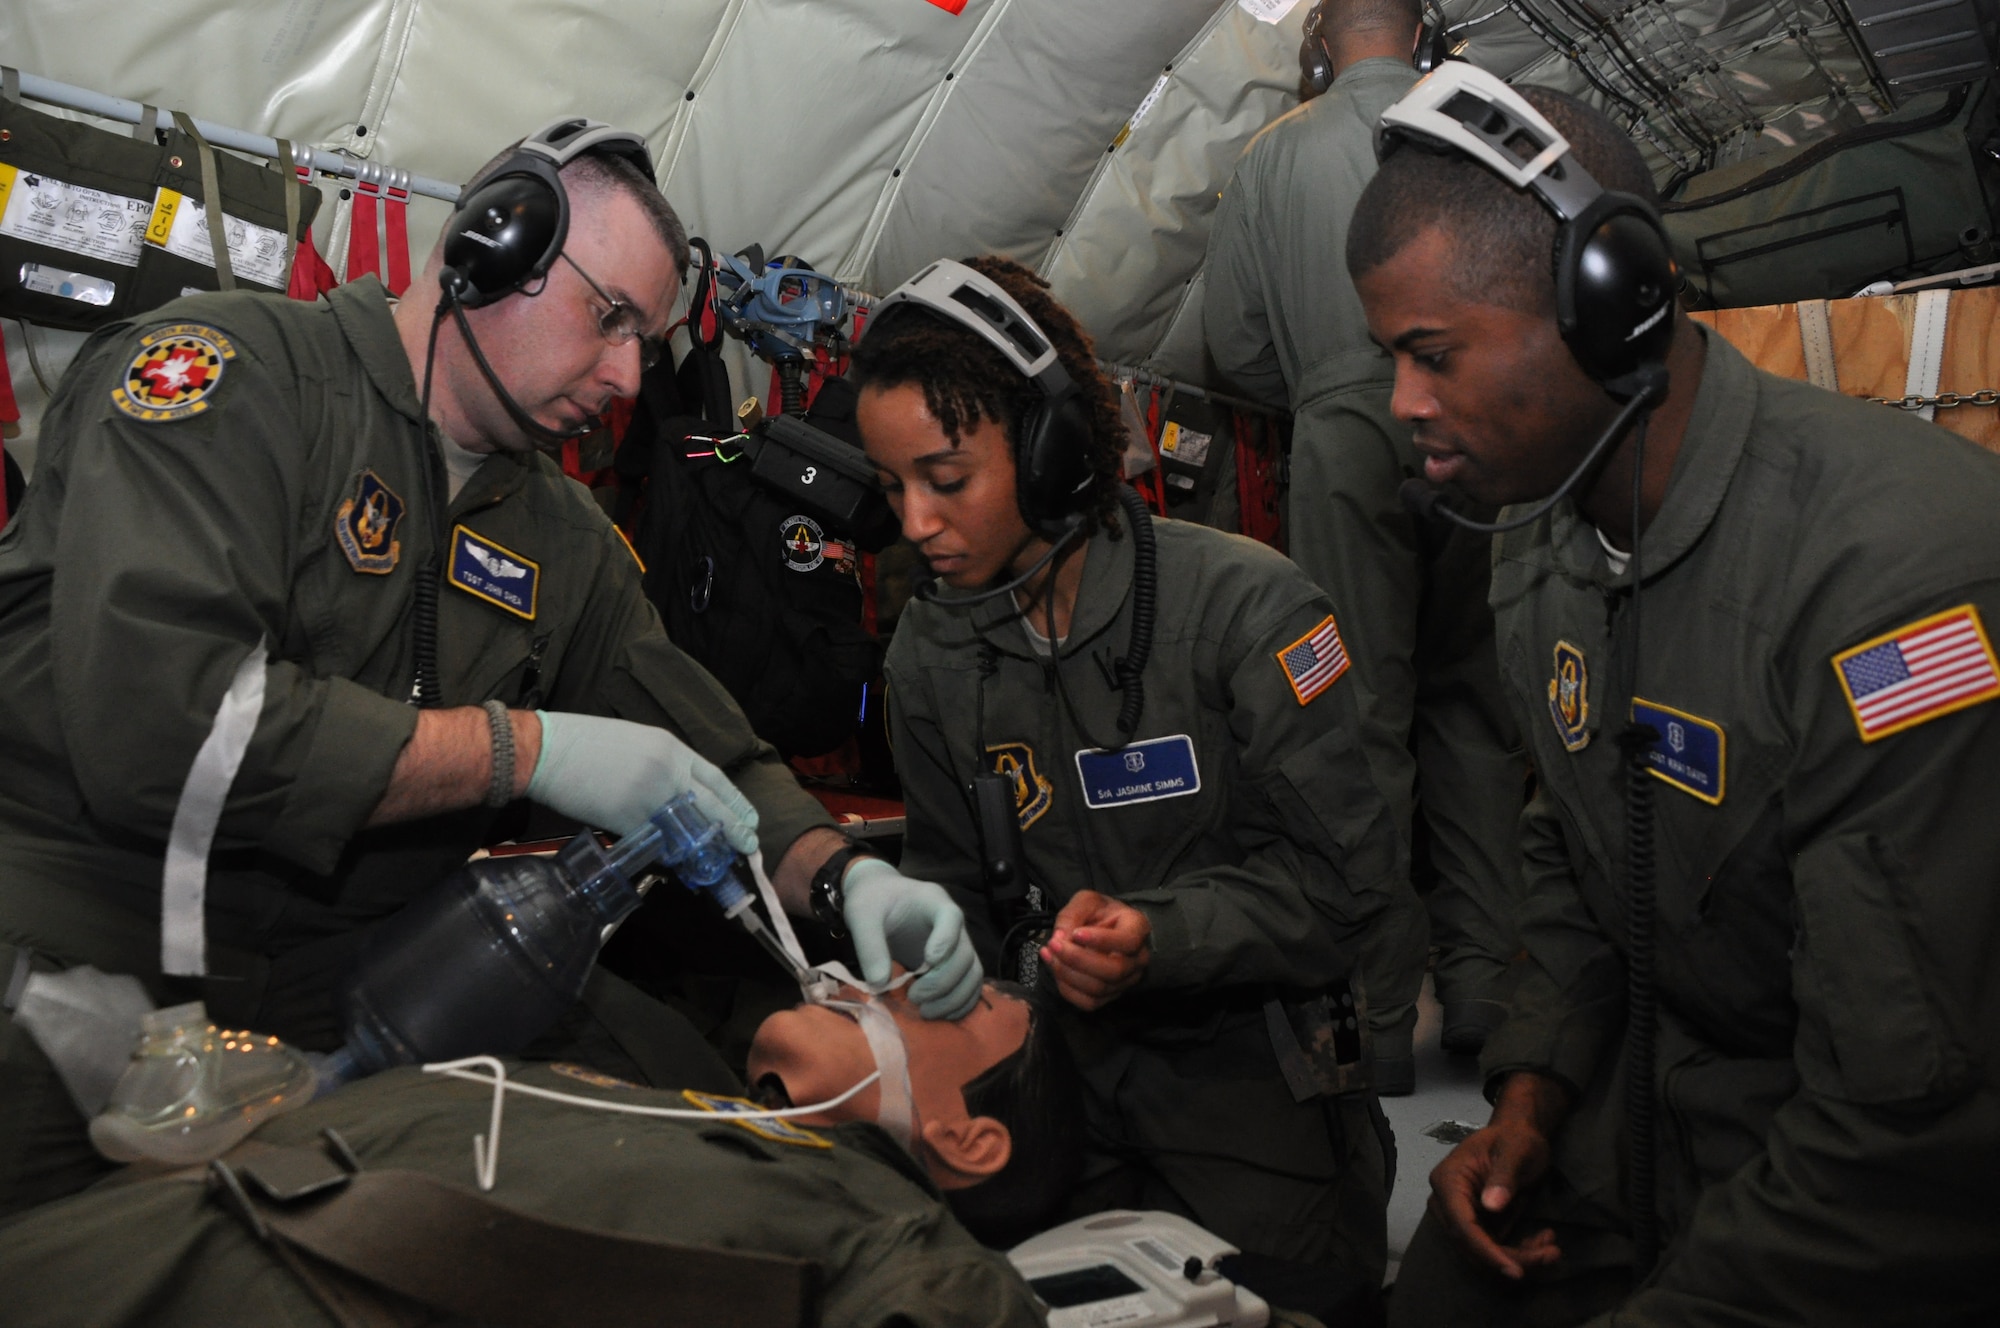 Tech. Sgt. John Shea, a medical technician for the 459th Aeromedical Evacuation Squadron, demonstrates how to properly secure a breathing tube to Staff Sgt. Khai Davis and Senior Airman Jasmine Simms, Critical Care Air Transport Team members with the 459th Aeromedical Staging Squadron at Joint Base Andrews, Md., during a training mission to Texas and California, March 24, 2013. The CCATT teamed up with the 459th Aeromedical Evacuation Squadron to get experience working together and to learn the ins and outs of taking care of patients while airborne. The two teams fly together once every three months. (U.S. Air Force photo/ Staff Sgt. Katie Spencer)